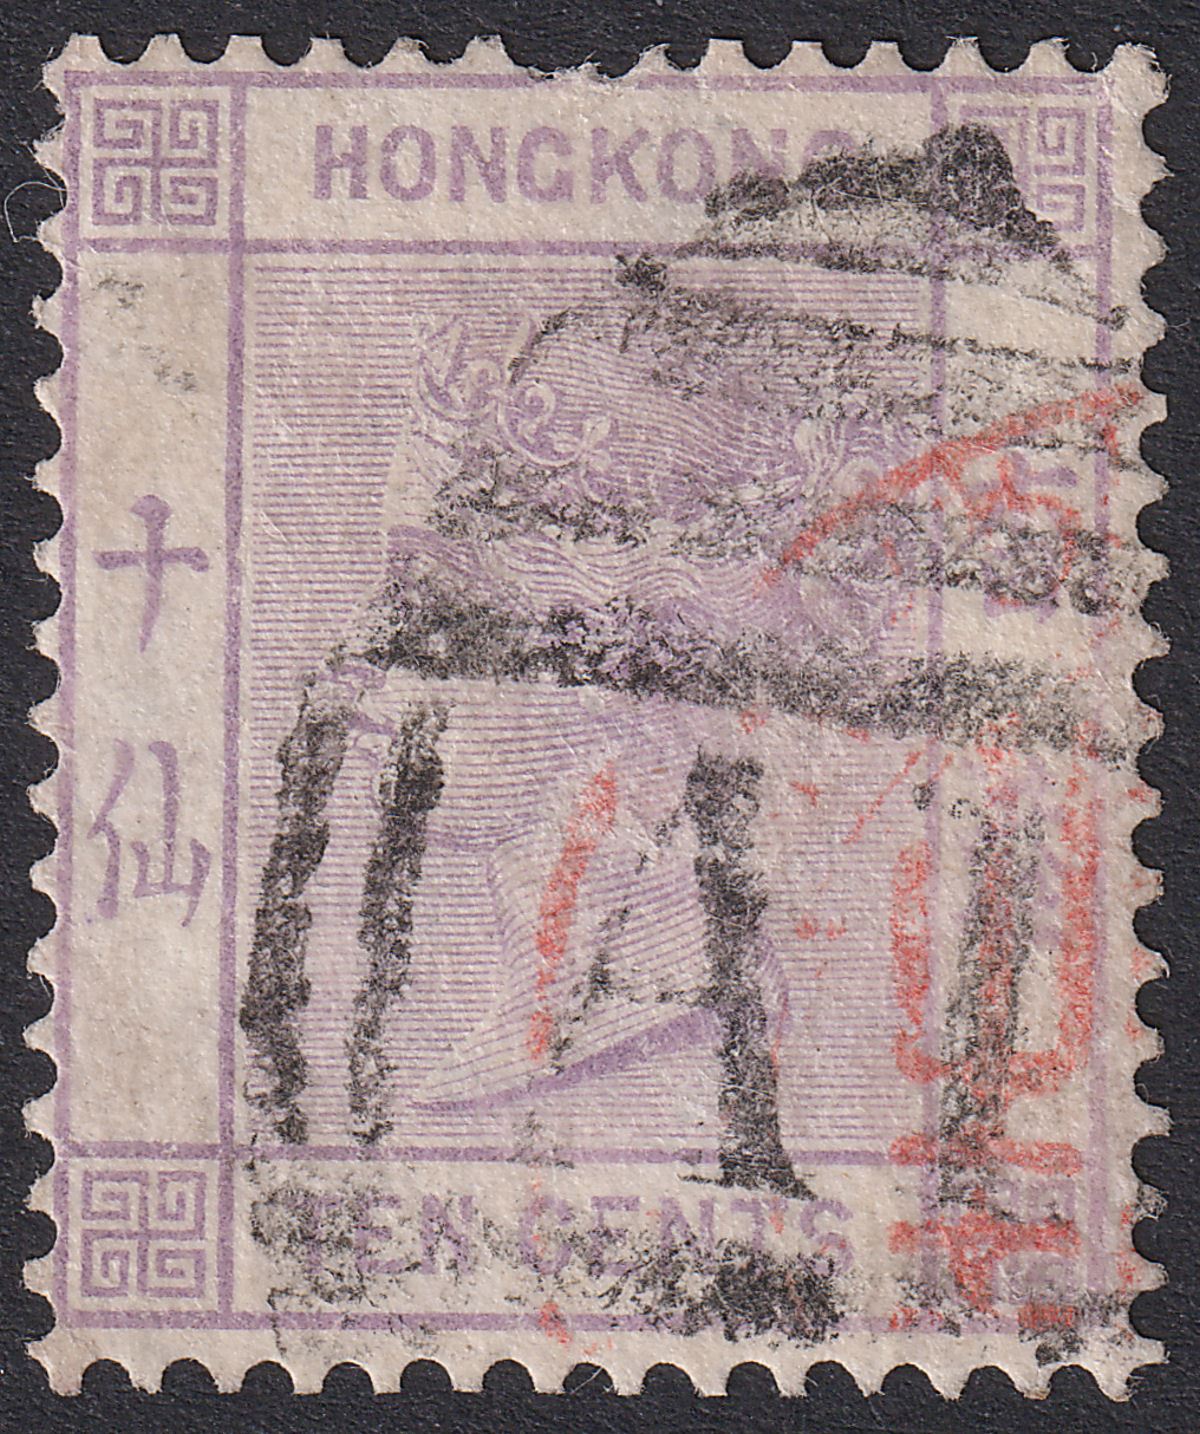 Hong Kong 1882 QV 10c Used A1 Postmark Amoy + Red Chinese Mark MSG Z35 cat £50